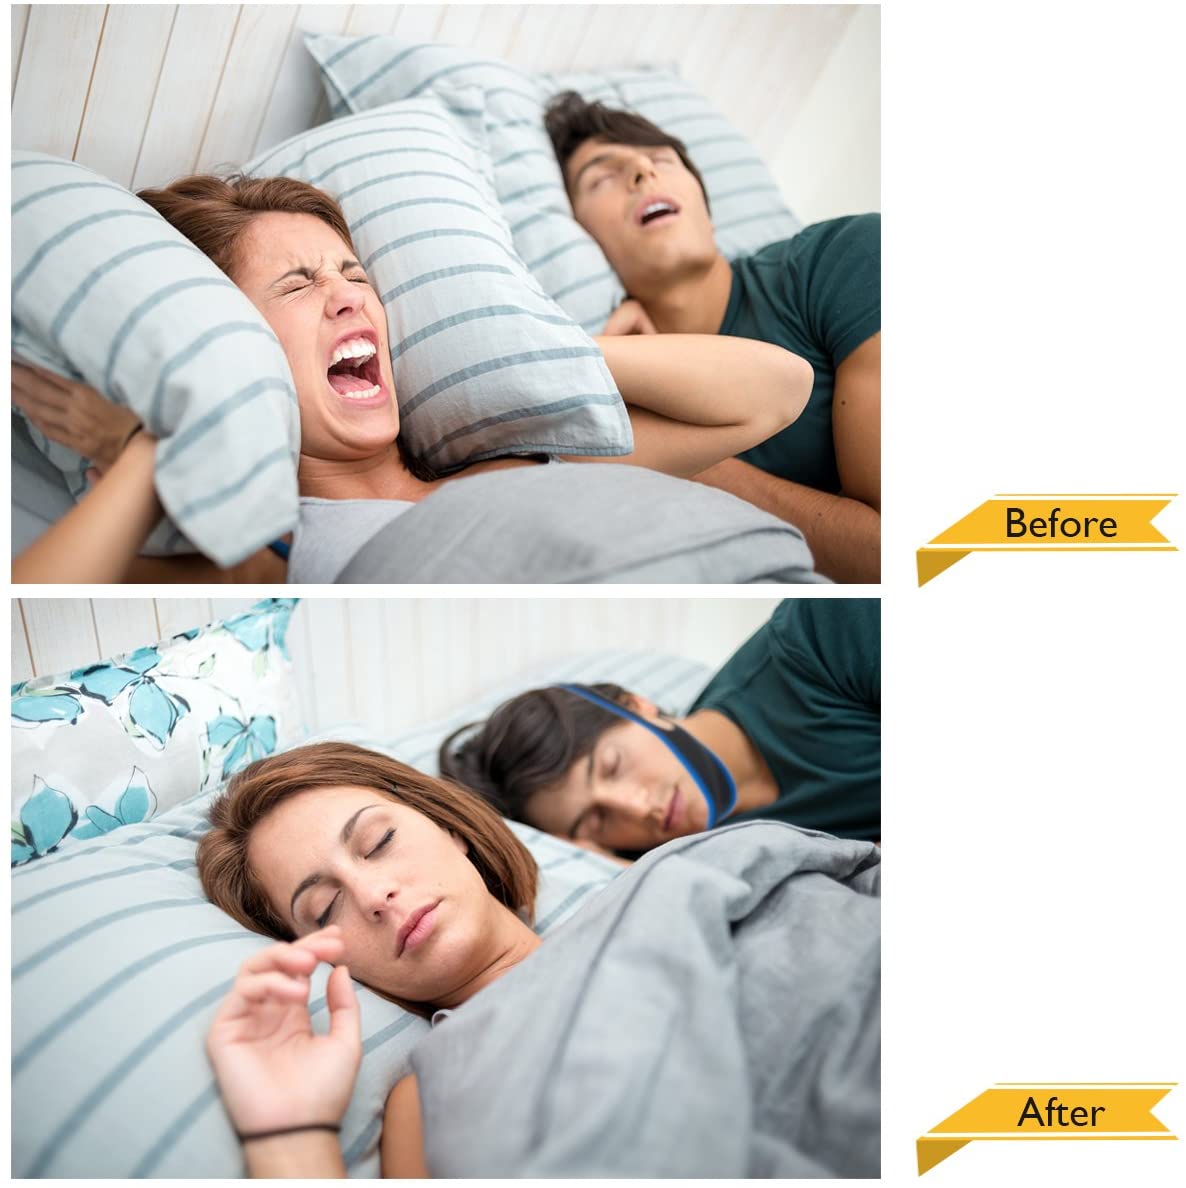 Anti Snoring Chin Strap,Snoring Solution Anti Snoring Devices Effective Stop Snoring Chin Strap for Men Women Adjustable Snore Reduction Chin Straps Snore Stopper Advanced Sleep Aids for Better Sleep